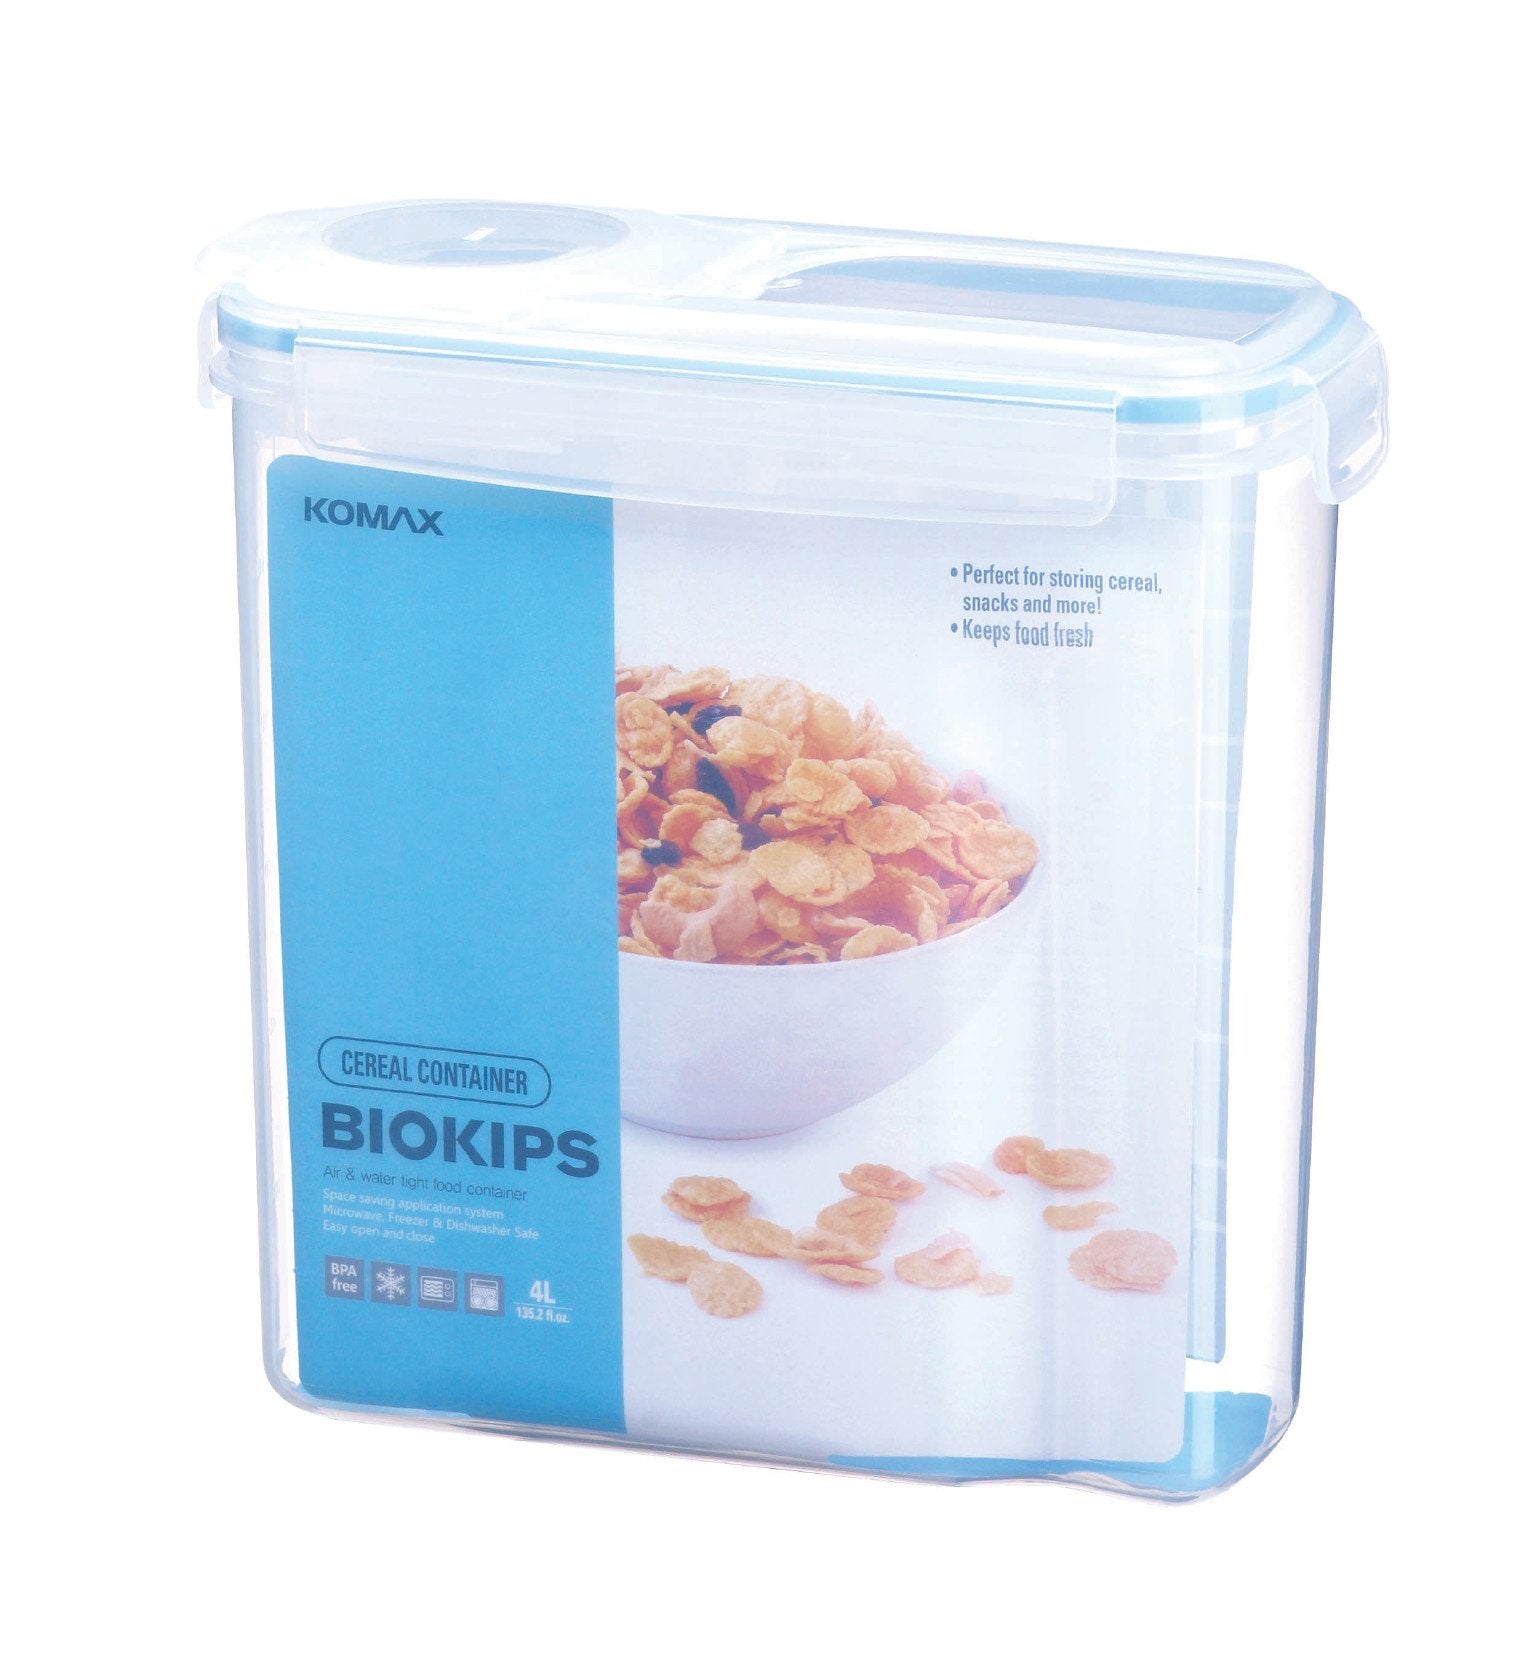 Komax Biokips Cereal Container, 4 L